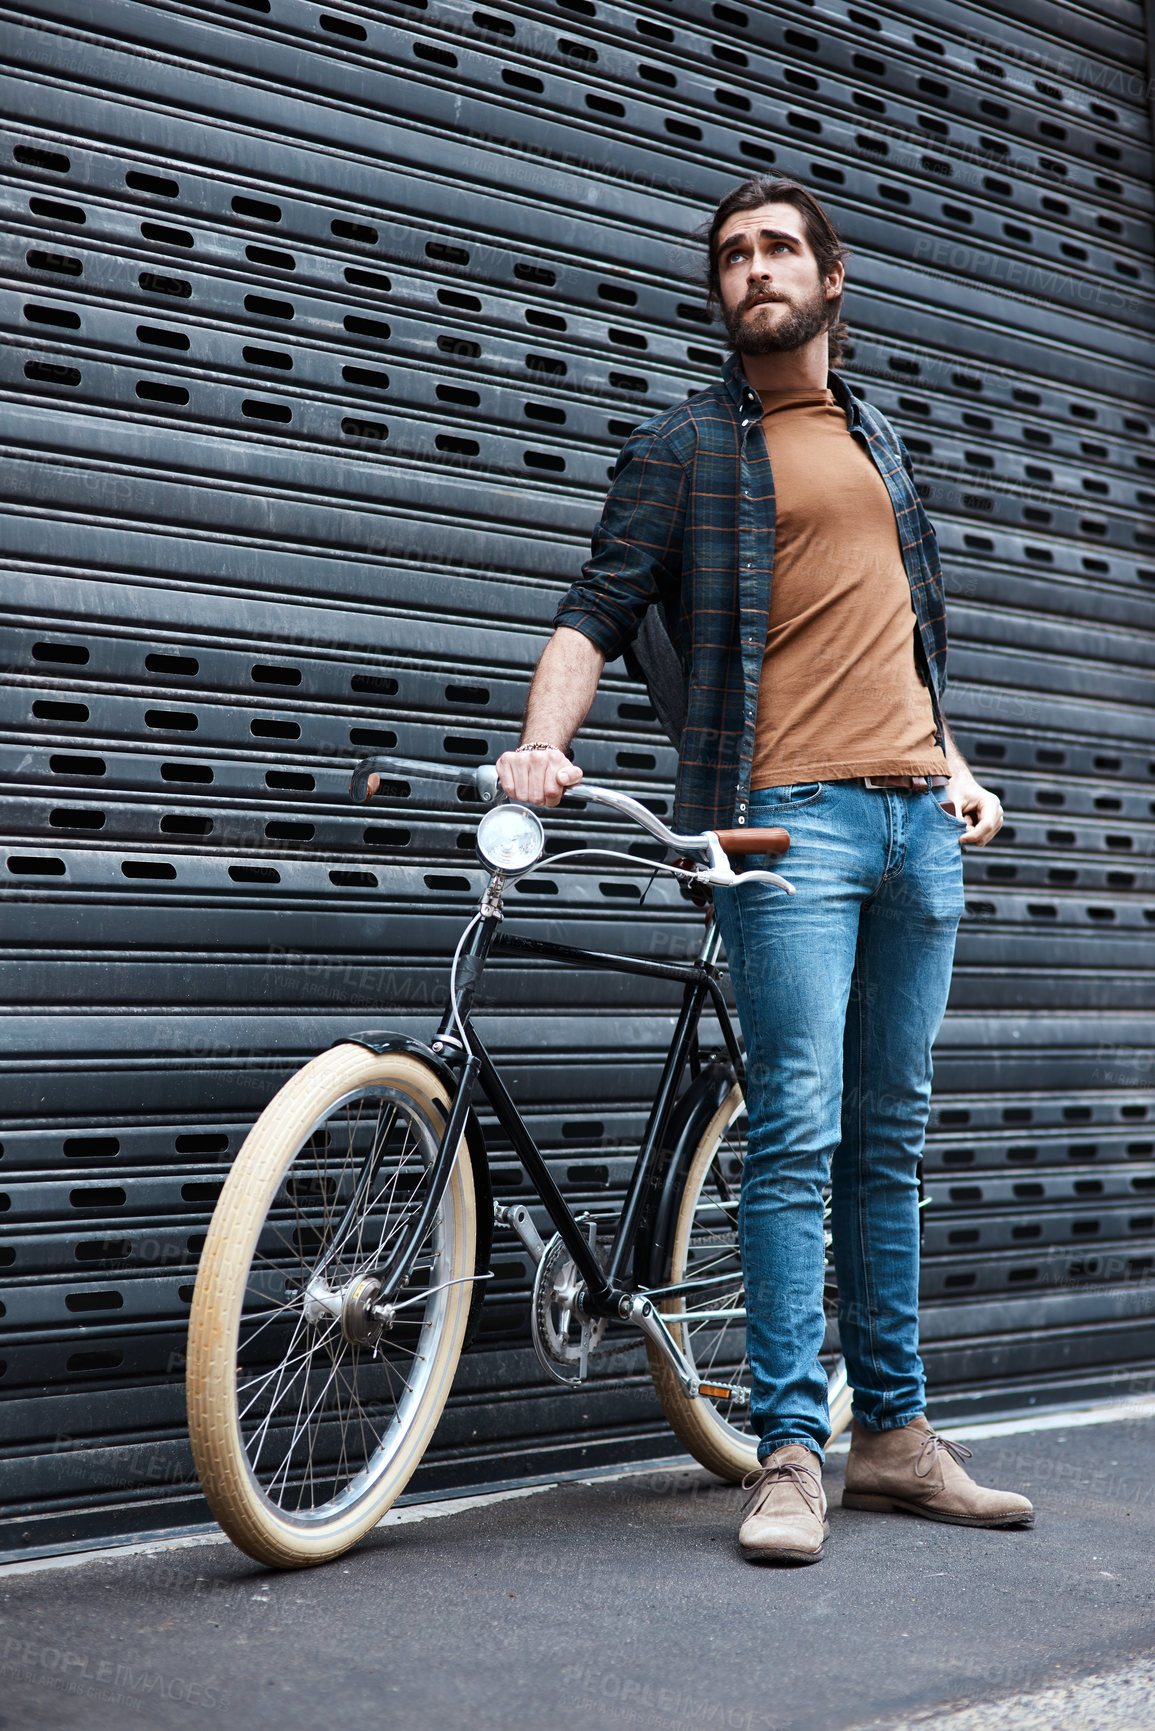 Buy stock photo Full length shot of a handsome young man posing next to his bicycle outdoors